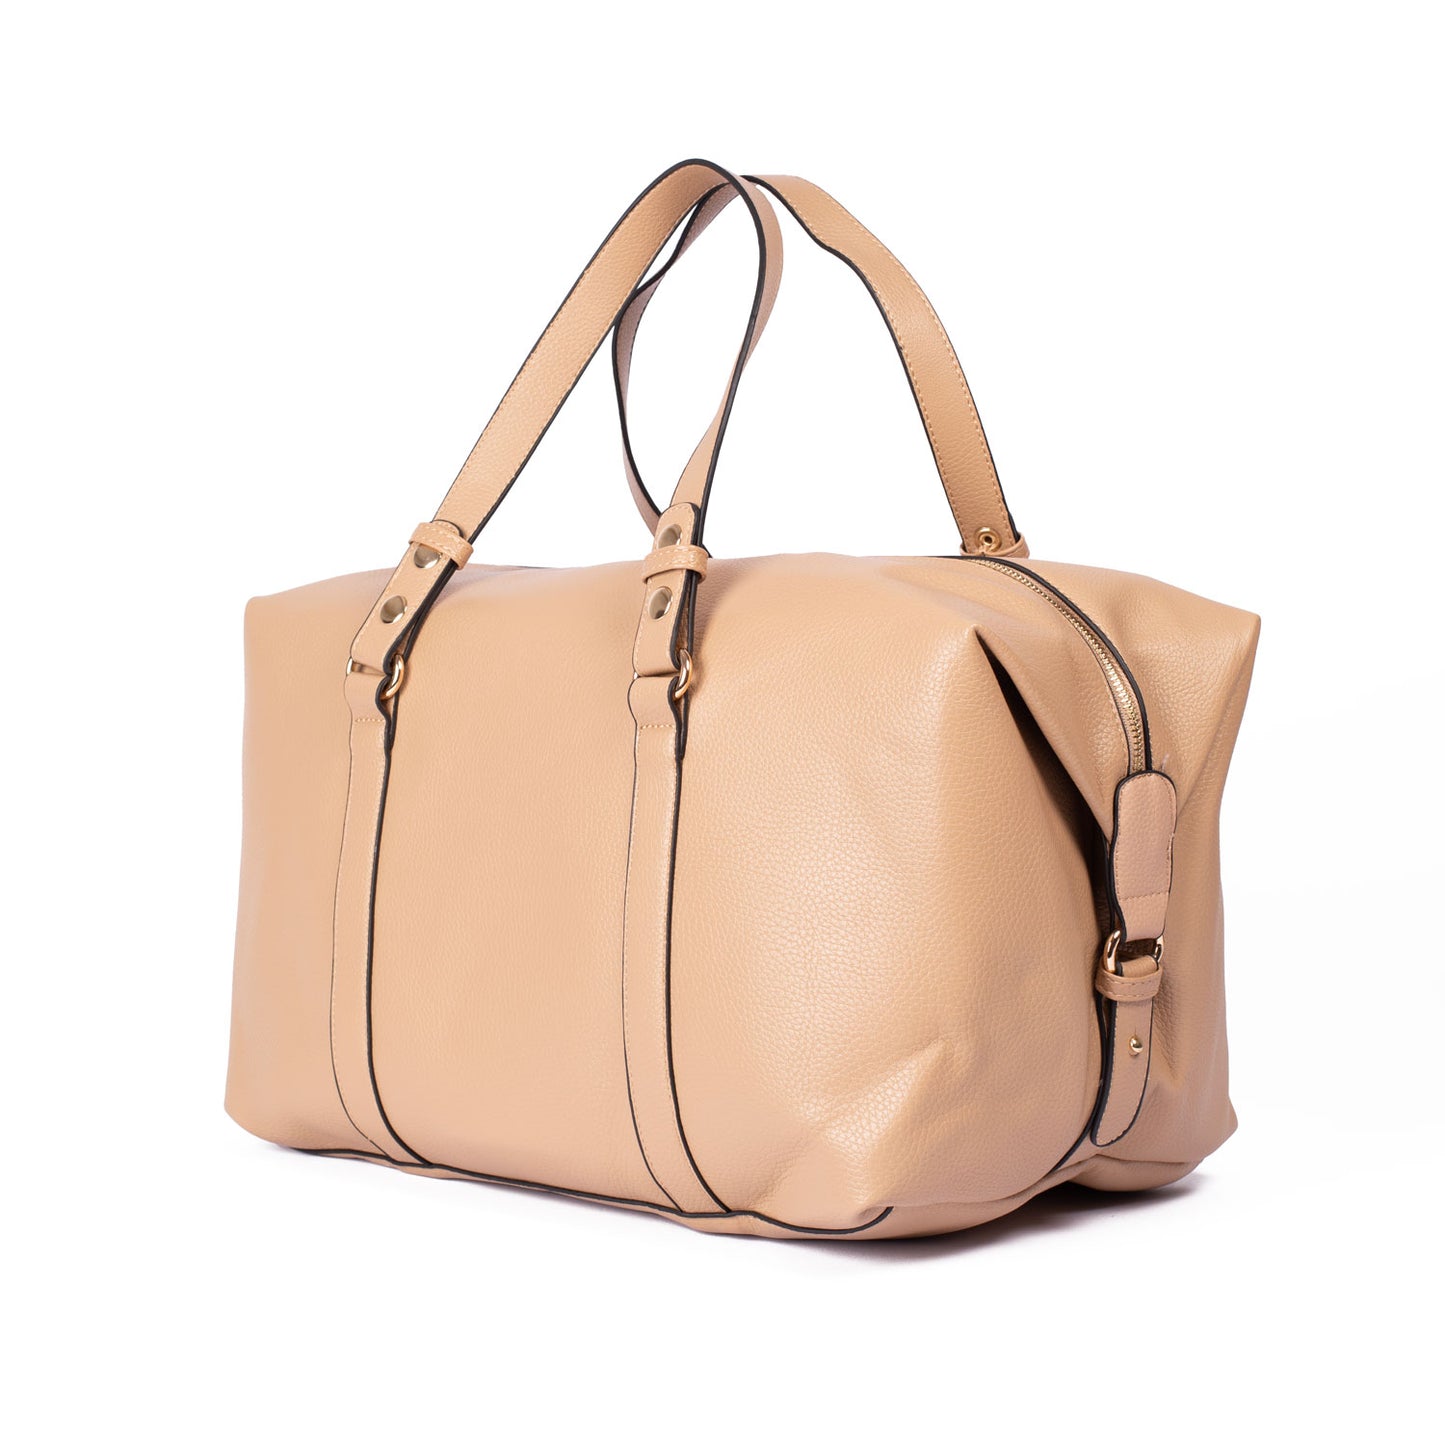 The Weekender in Taupe